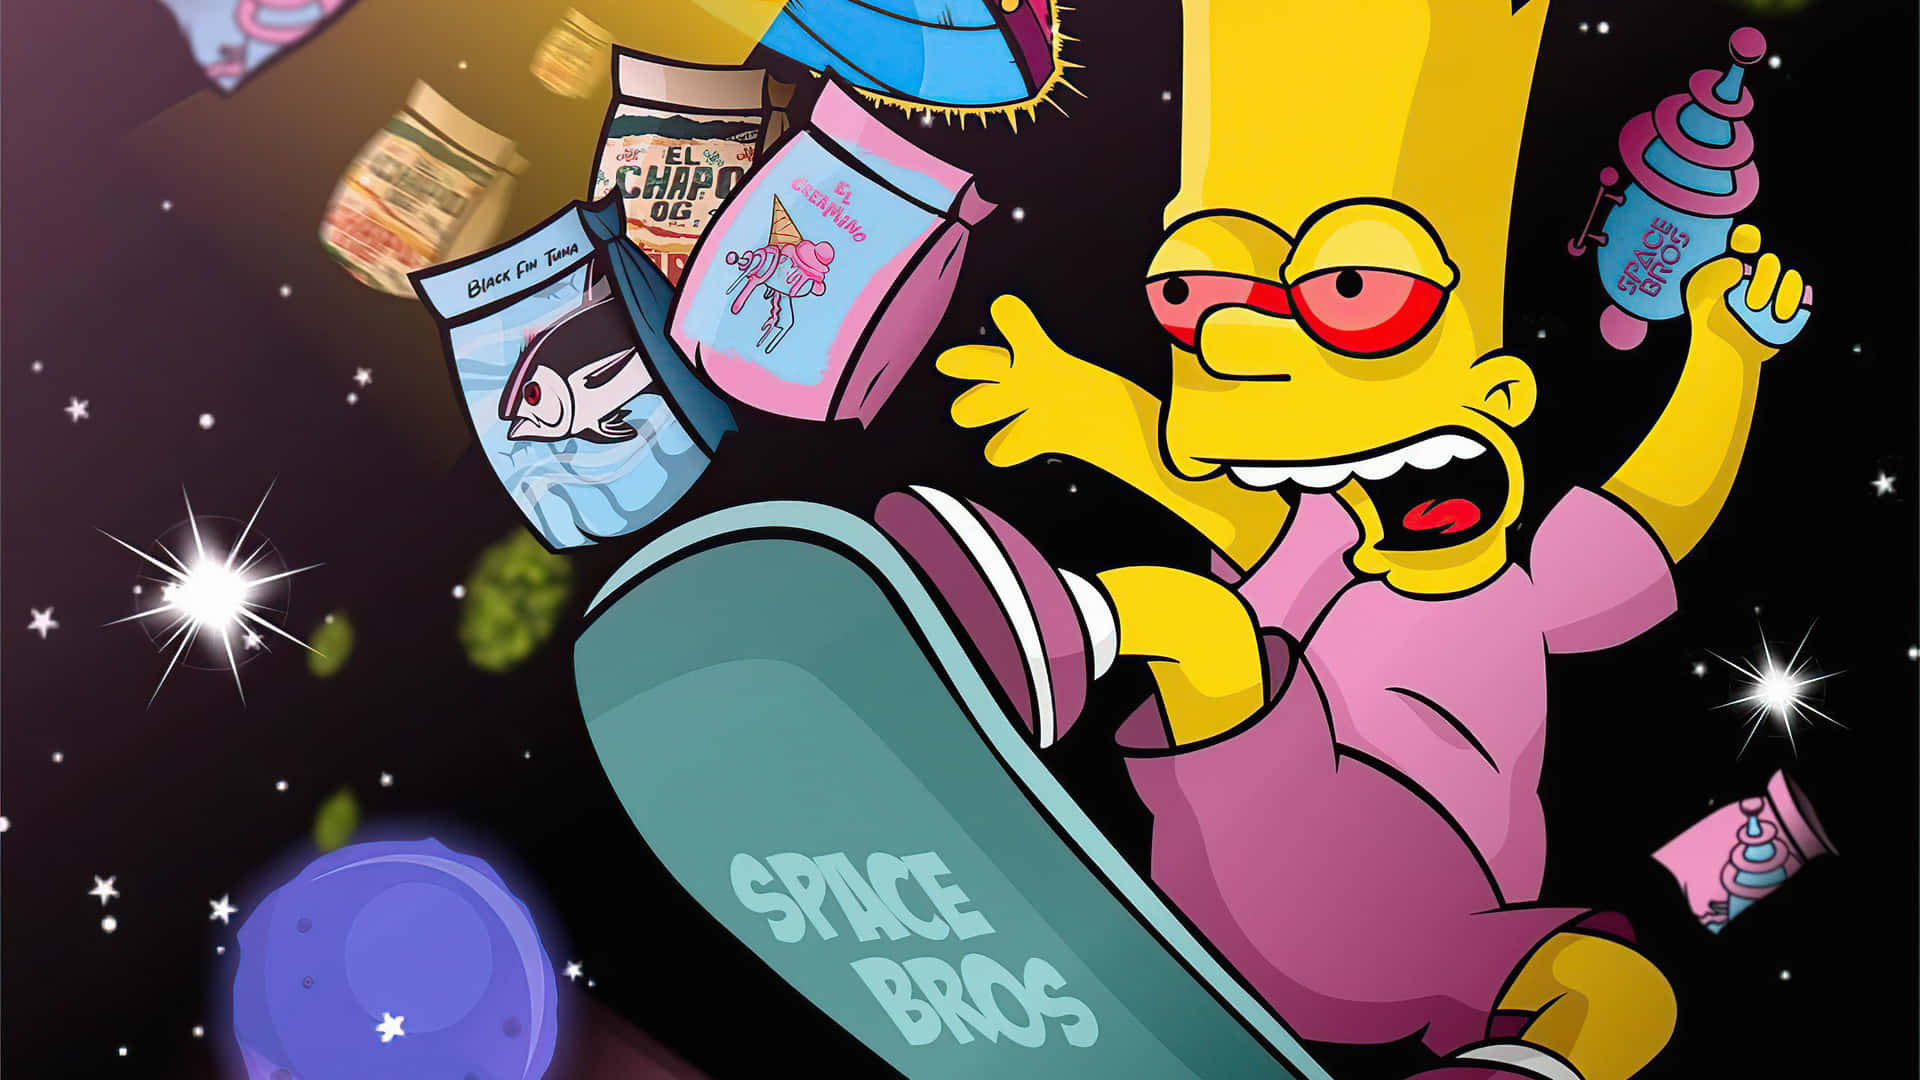 Enjoy the amazing world of The Simpsons from your PC Wallpaper